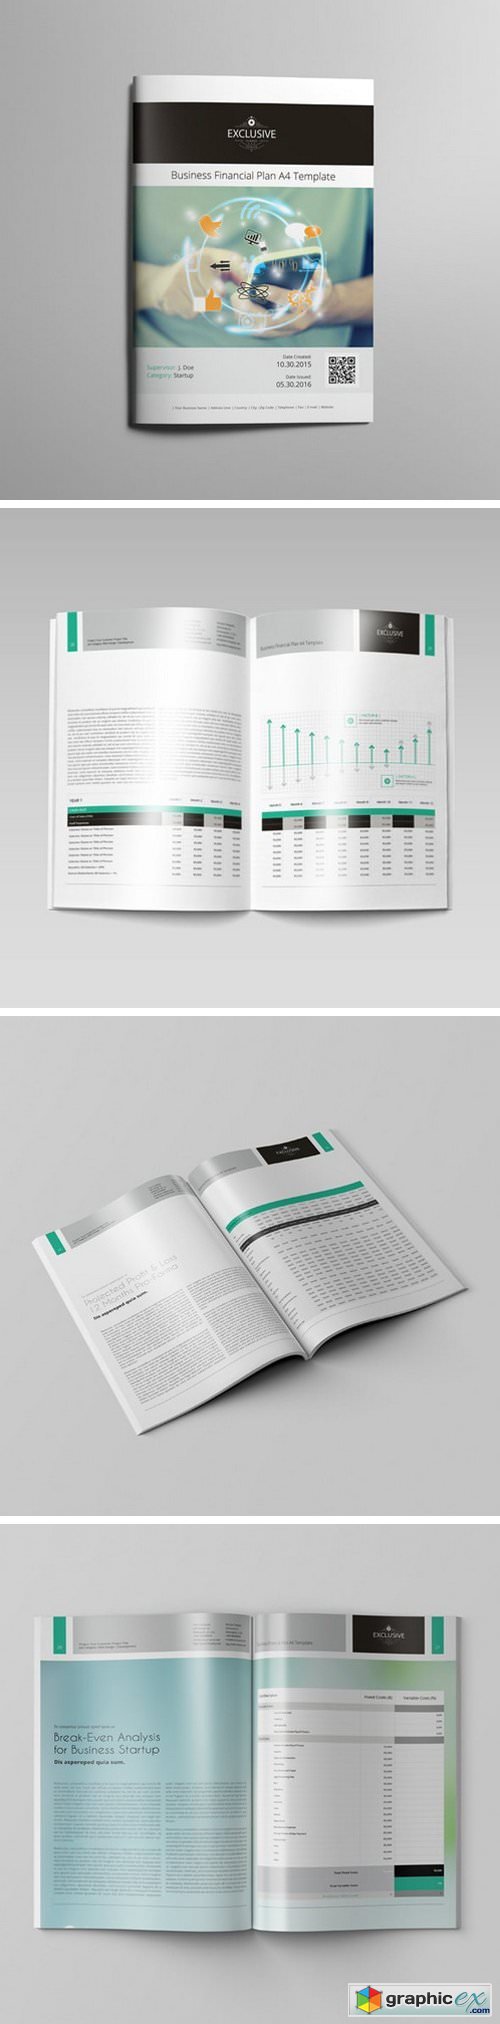 KeBoto - Business Financial Plan A4 Template